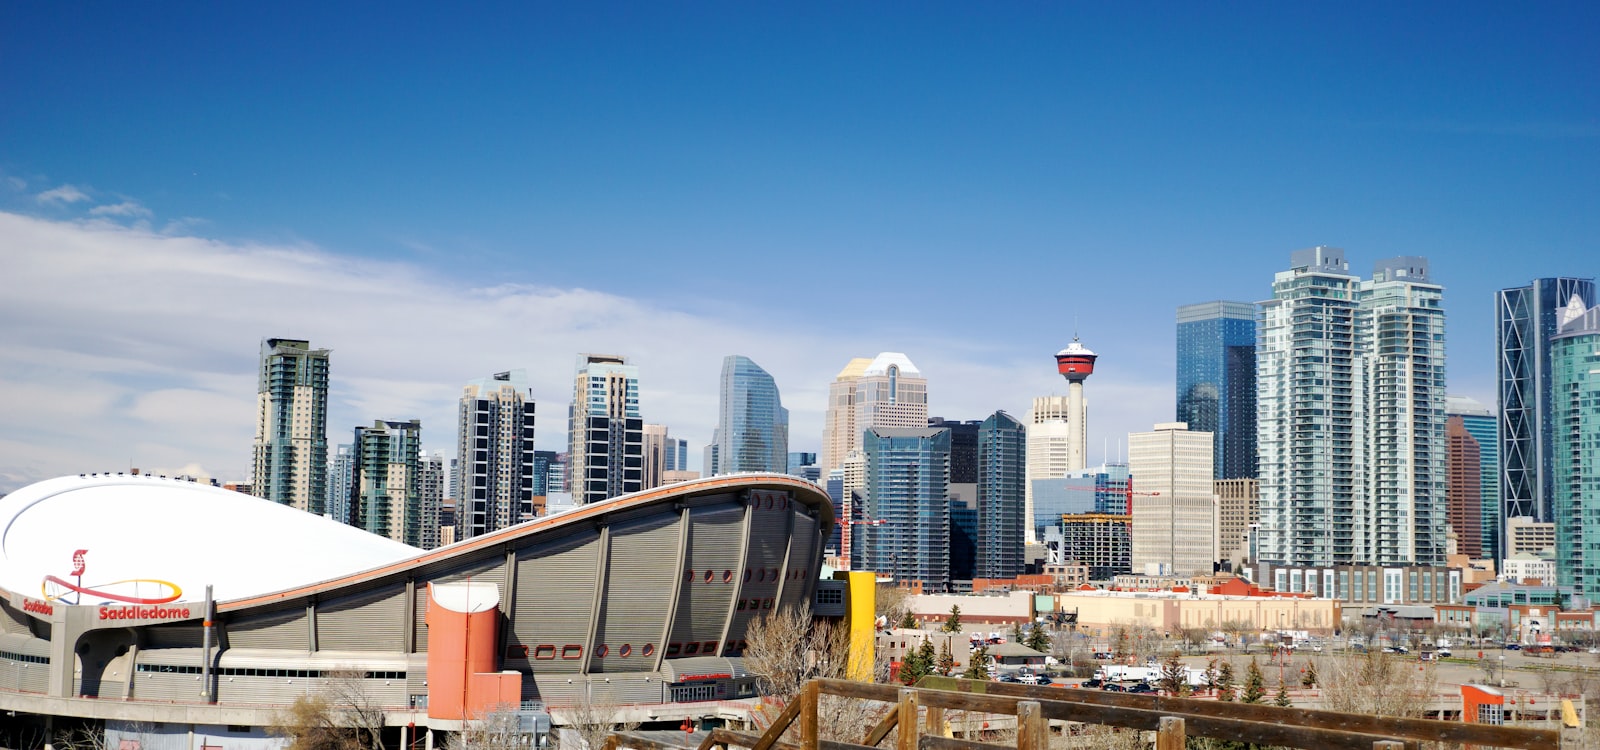 FTB: Calgary Flames get a new arena, paid for by the public